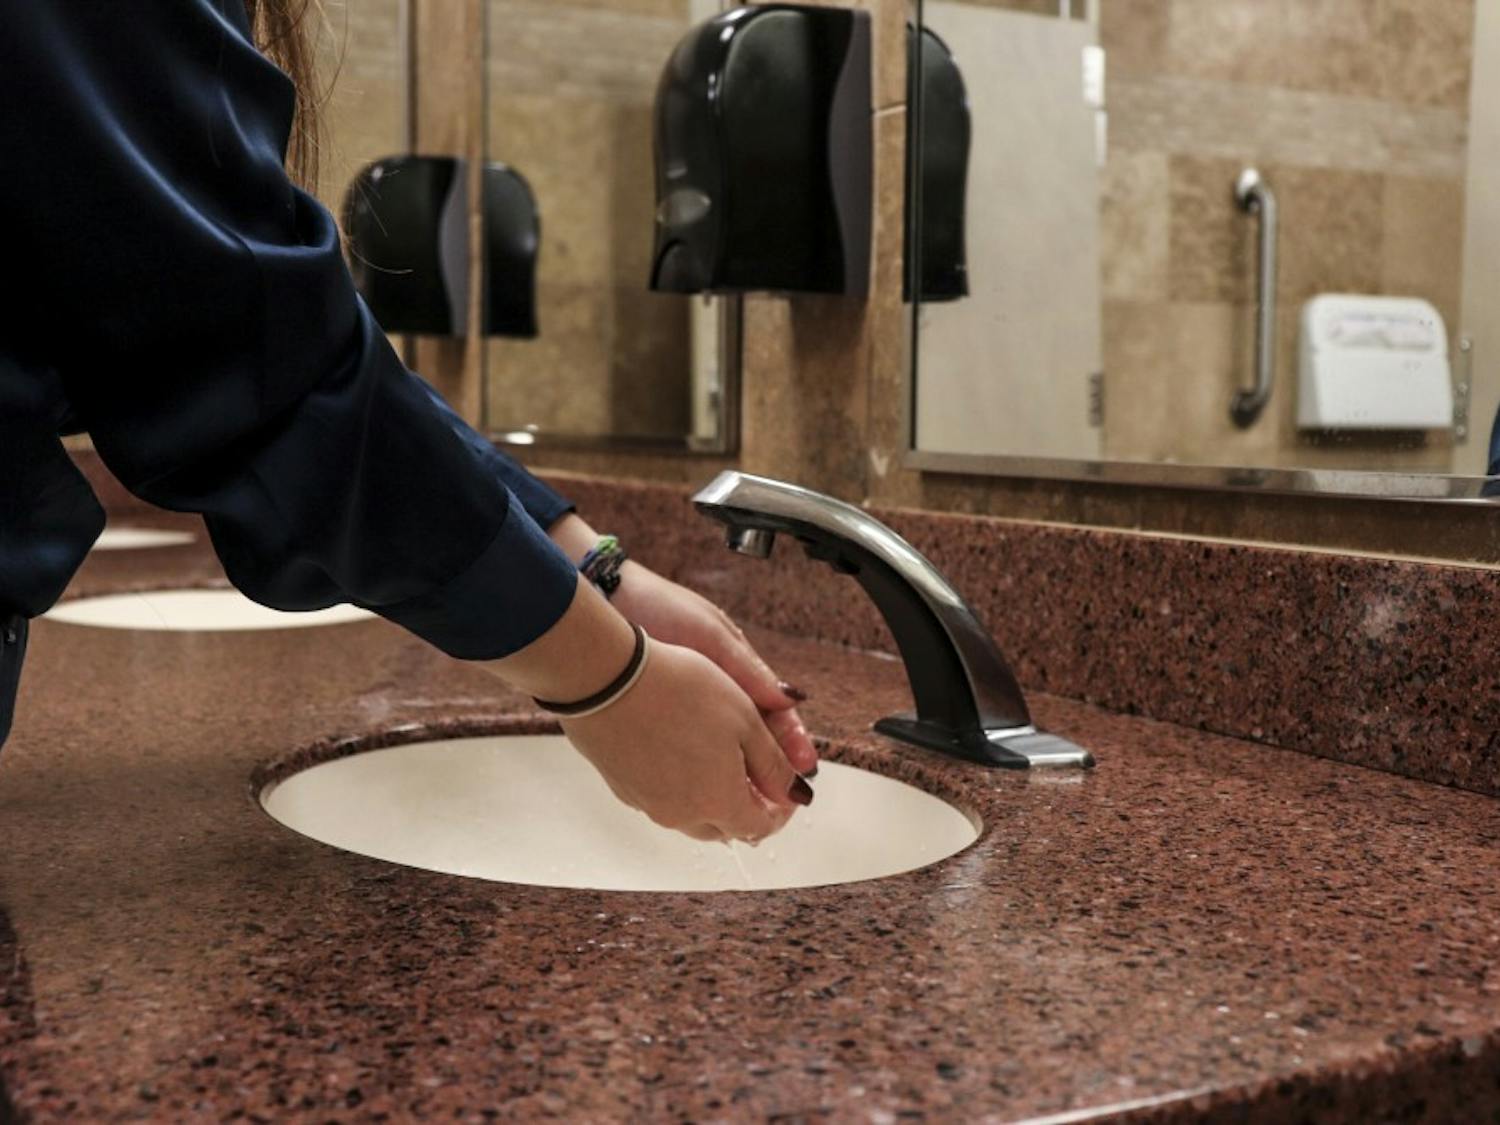 A UNM student washes their hands in a bathroom that was recently reviewed on a Twitter page that has gotten attention.&nbsp;